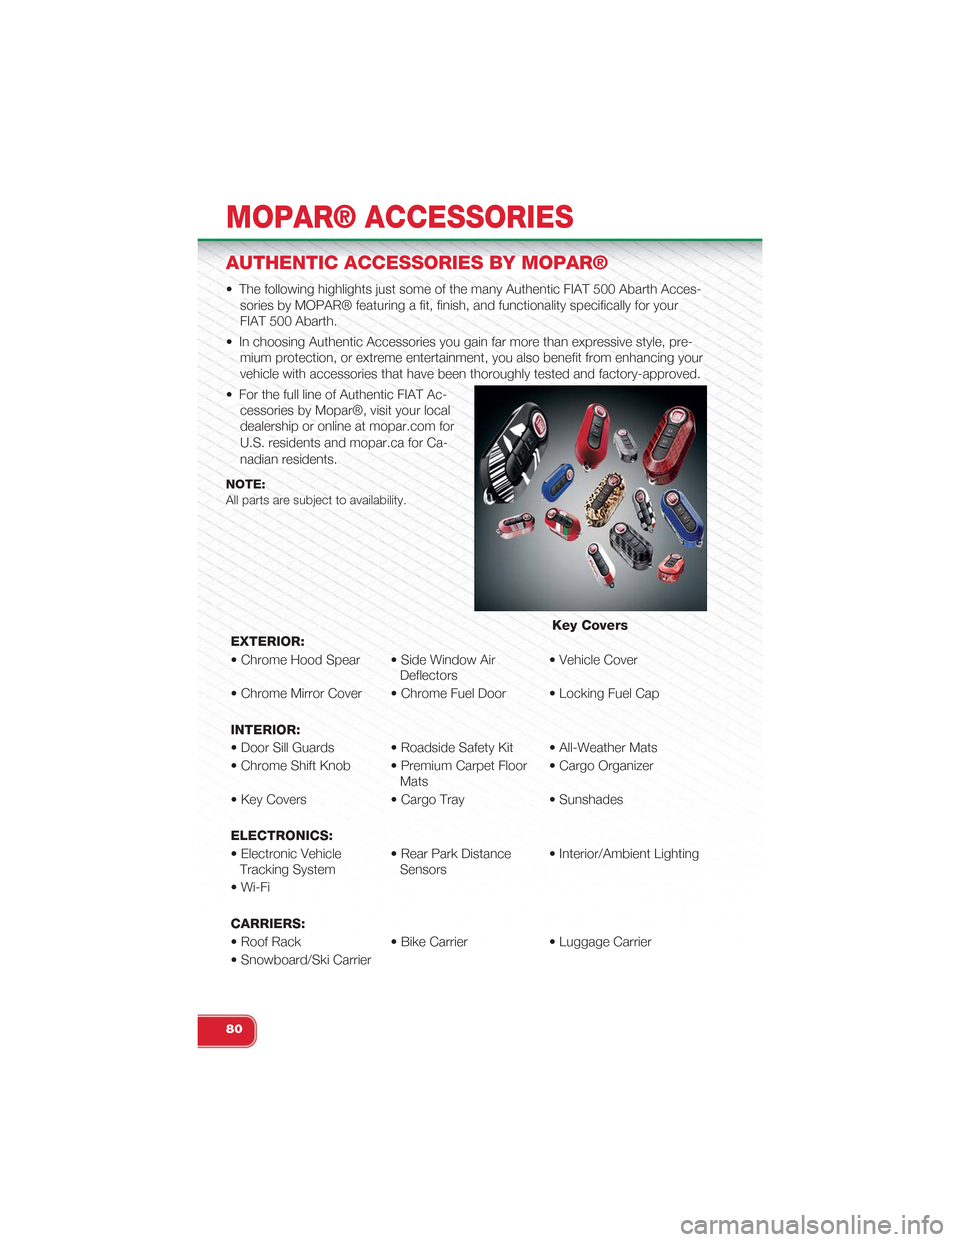 FIAT 500 ABARTH 2014 2.G User Guide AUTHENTIC ACCESSORIES BY MOPAR®
• The following highlights just some of the many Authentic FIAT 500 Abarth Acces-
sories by MOPAR® featuring a fit, finish, and functionality specifically for your
